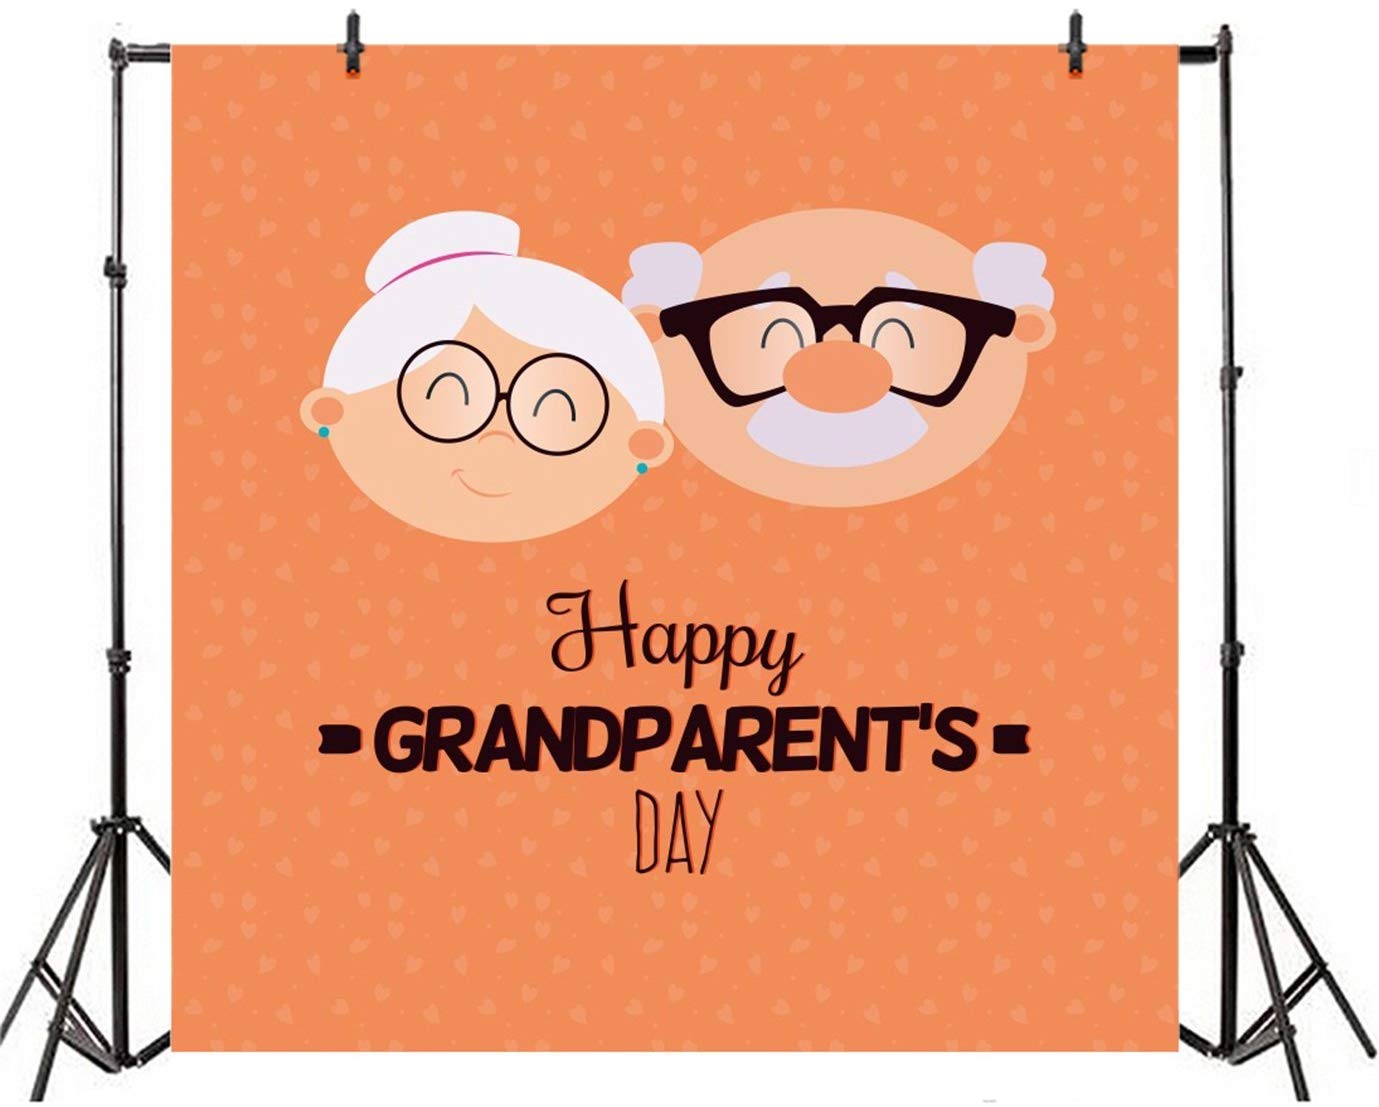 Happy Grandfather And Grandmother Day - HD Wallpaper 